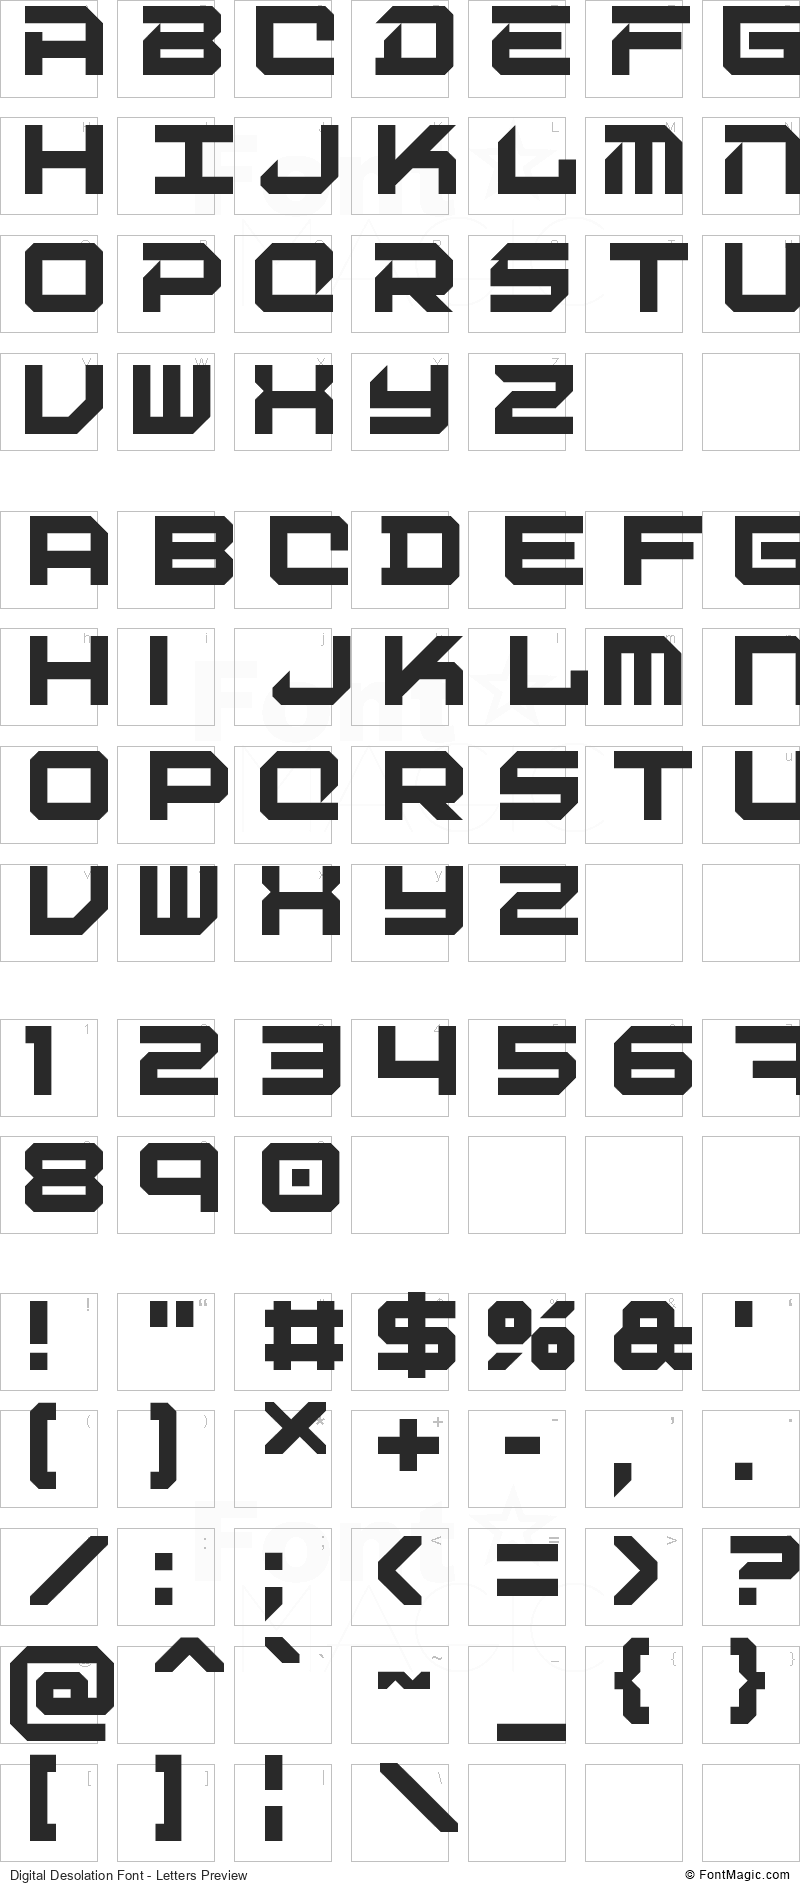 Digital Desolation Font - All Latters Preview Chart